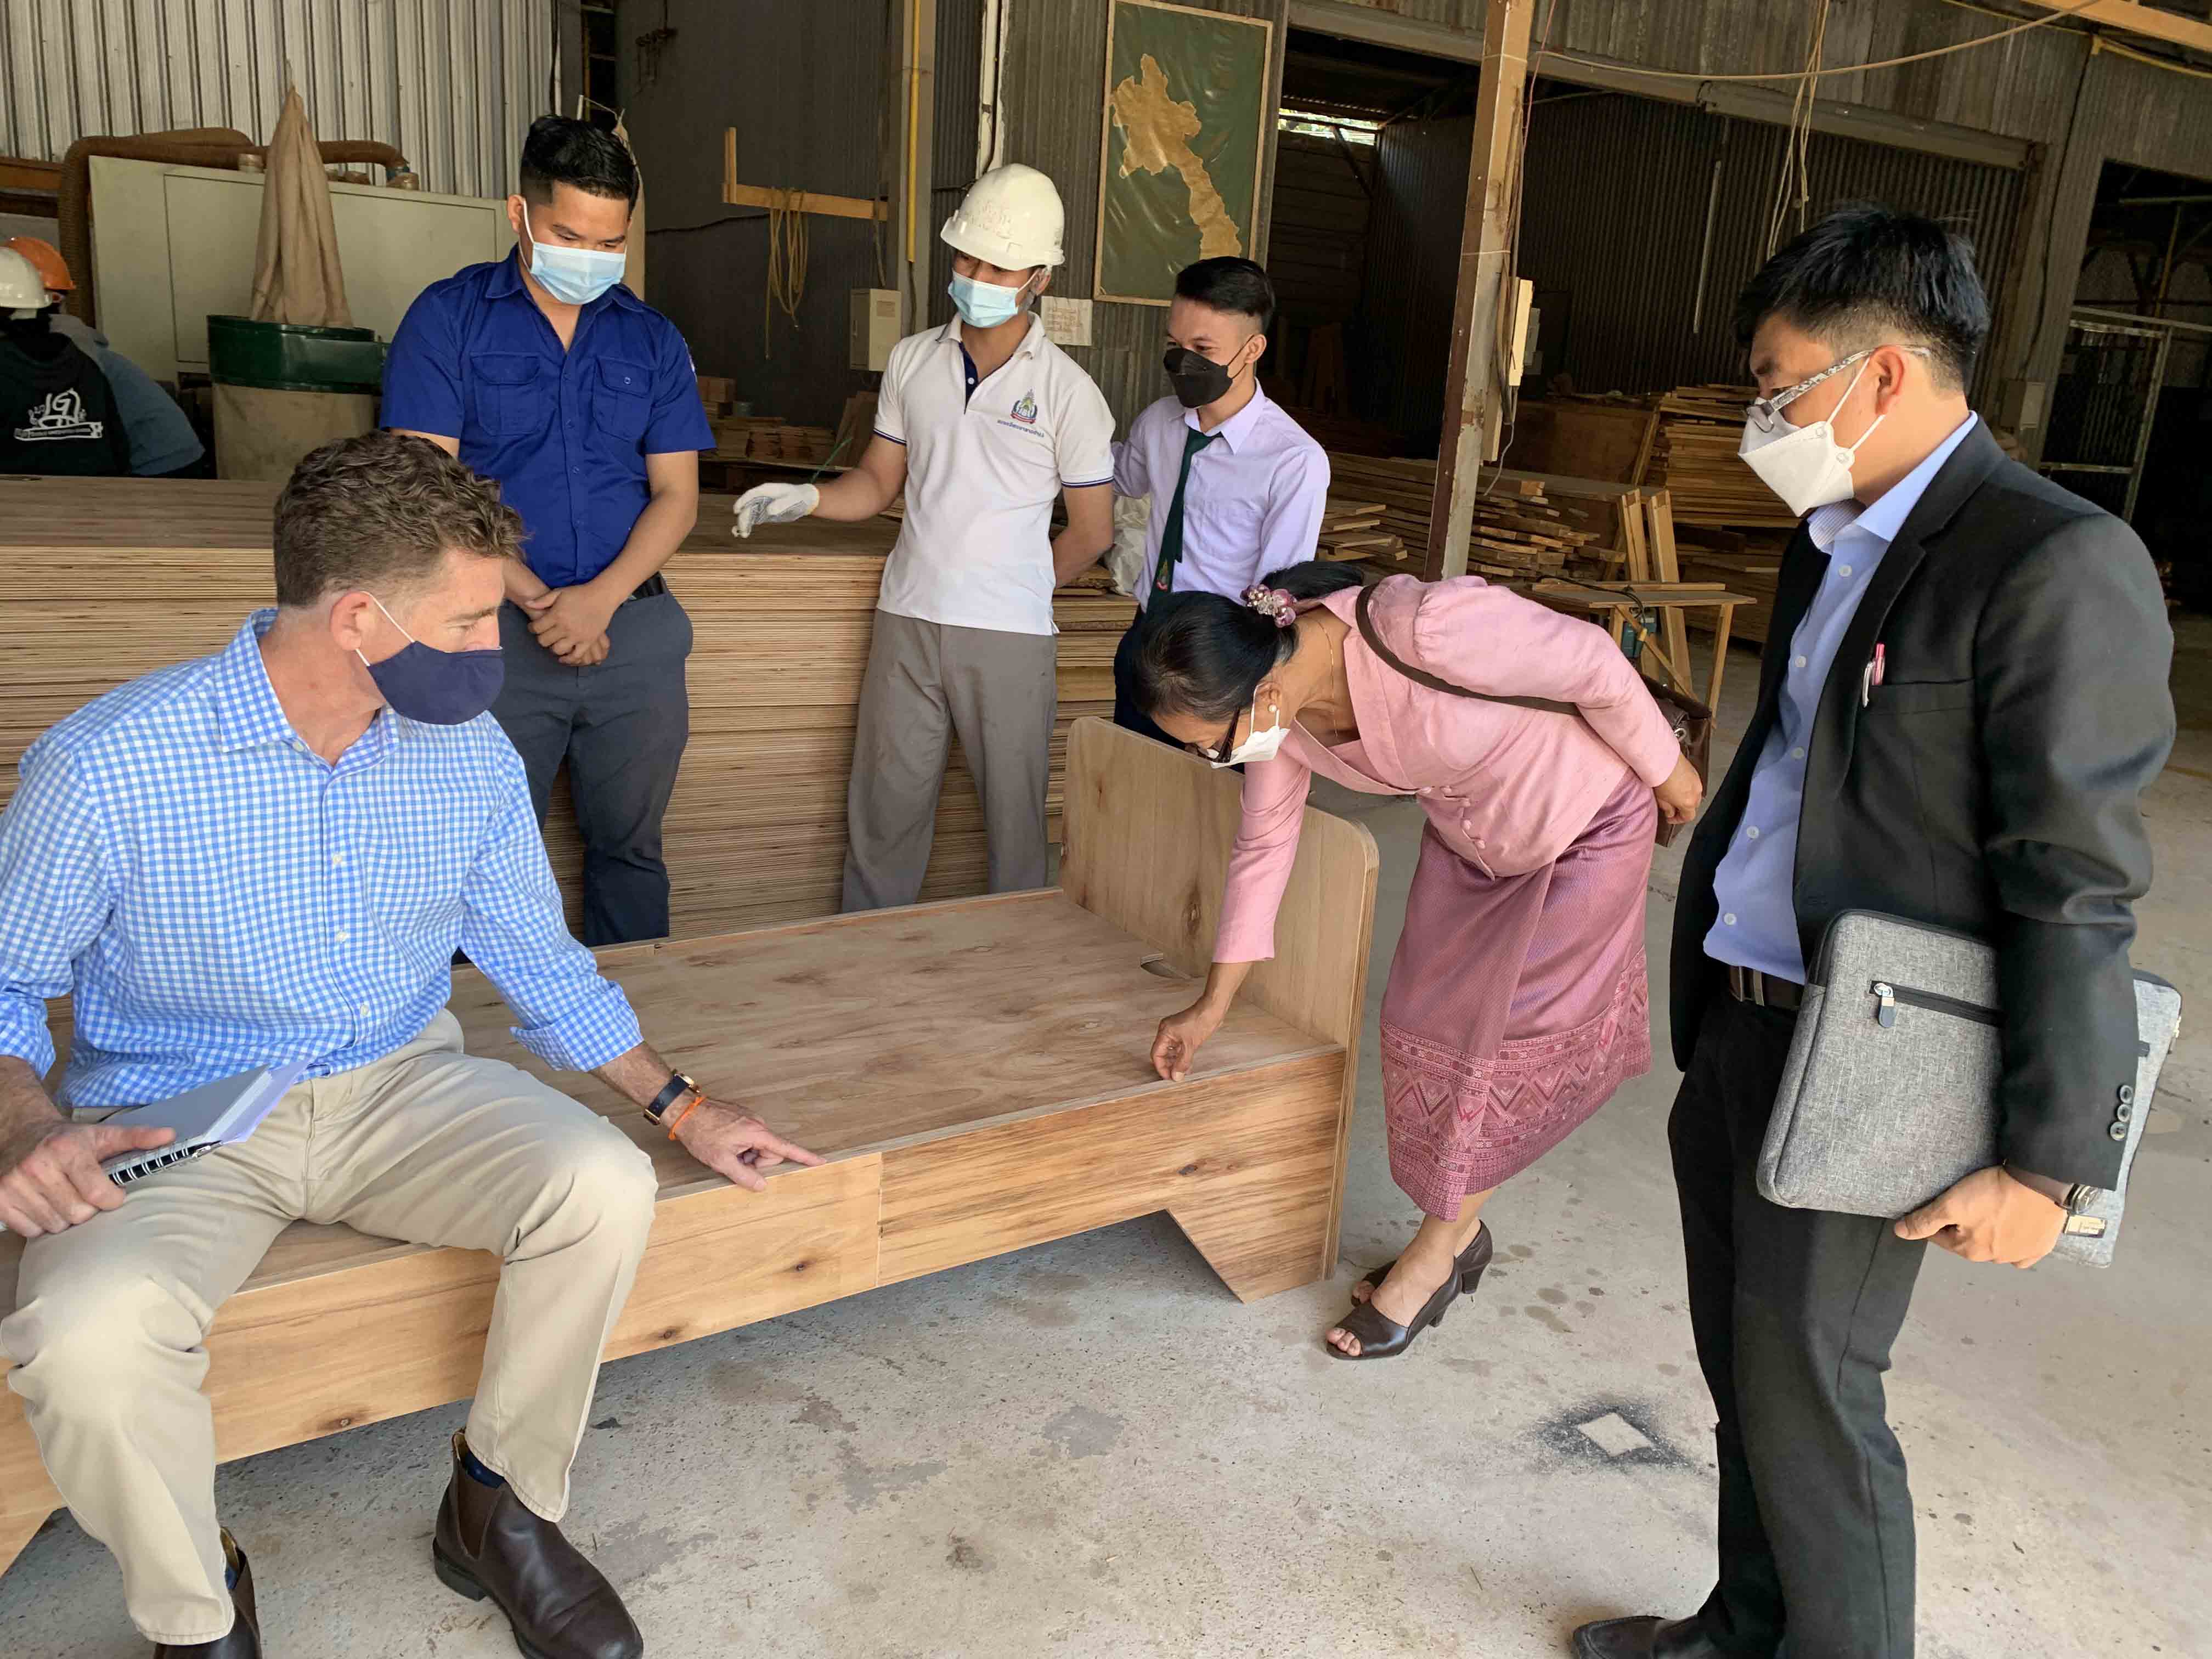 Deputy Head of Mission at the Australian Embassy in Lao PDR, Dan Heldon (left), inspecting the wooden beds during a recent visit.